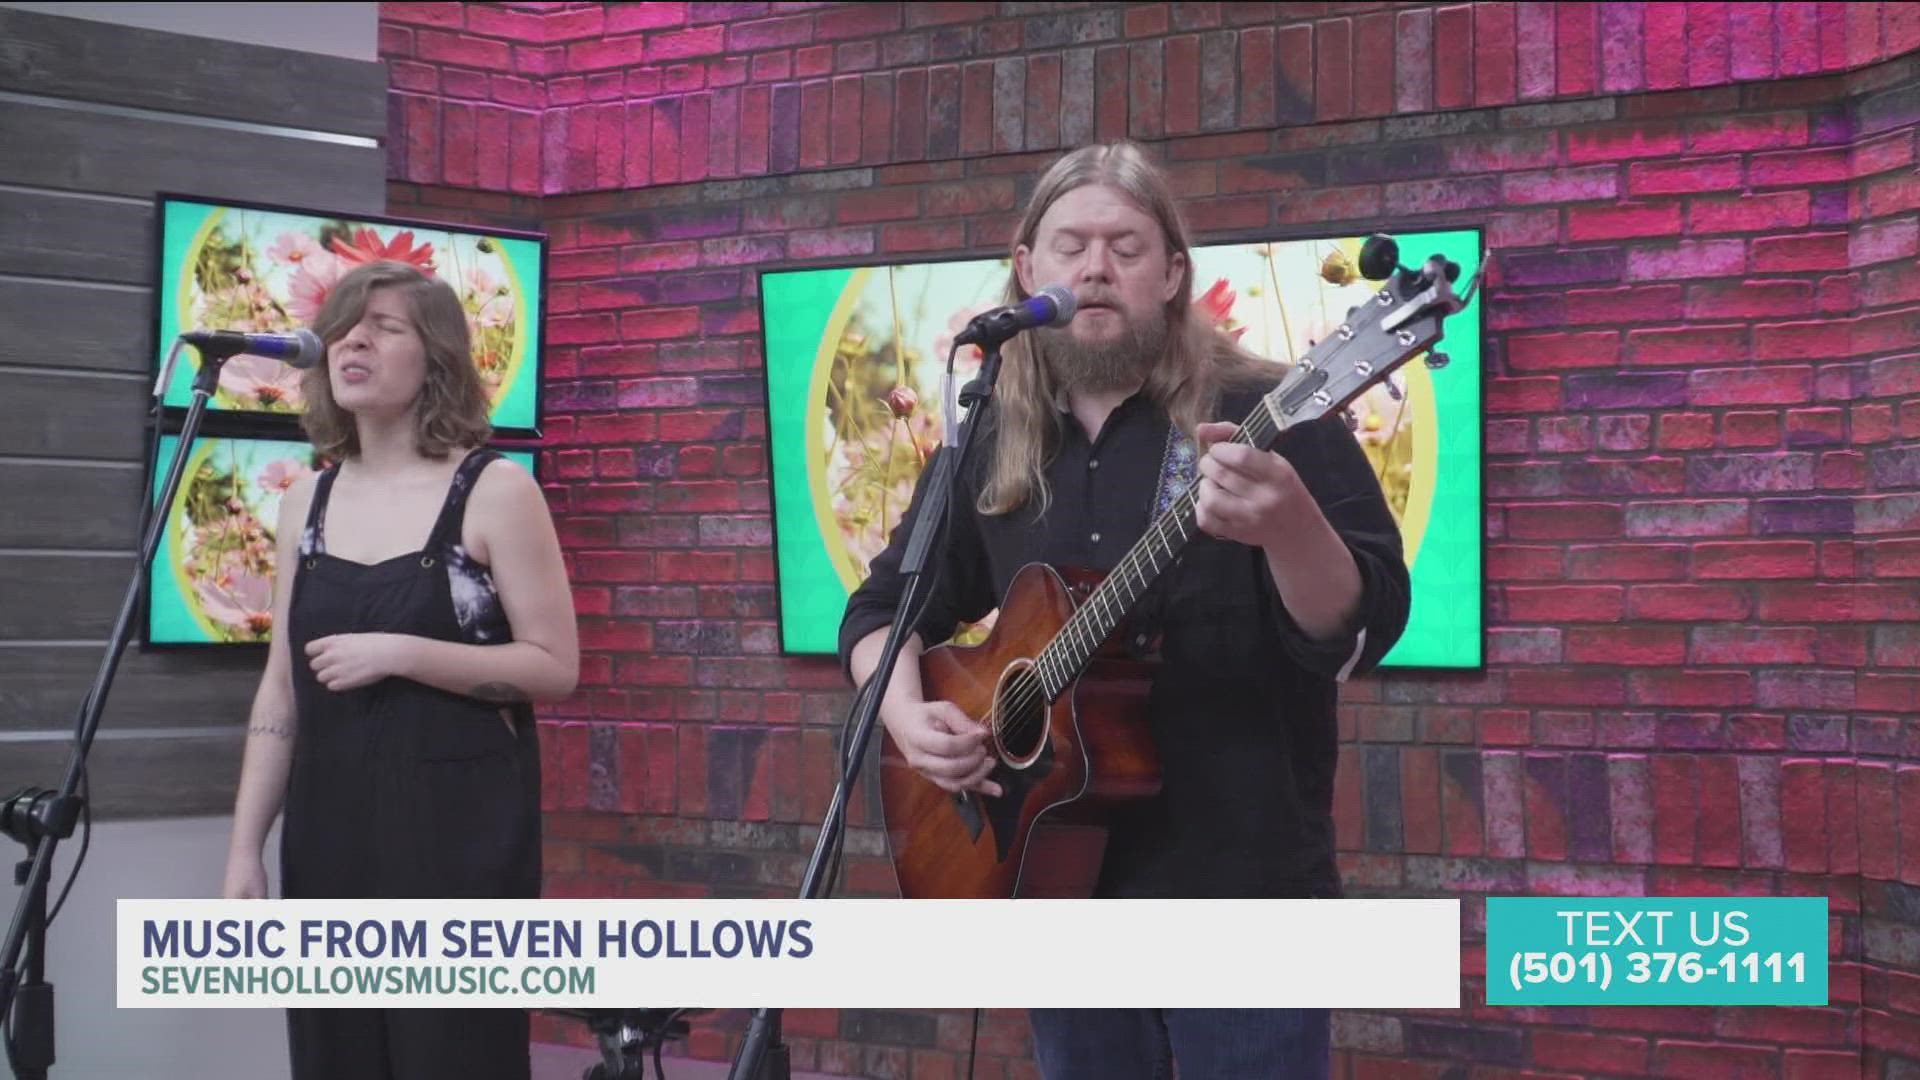 This morning we are listening to music from Seven Hollows!